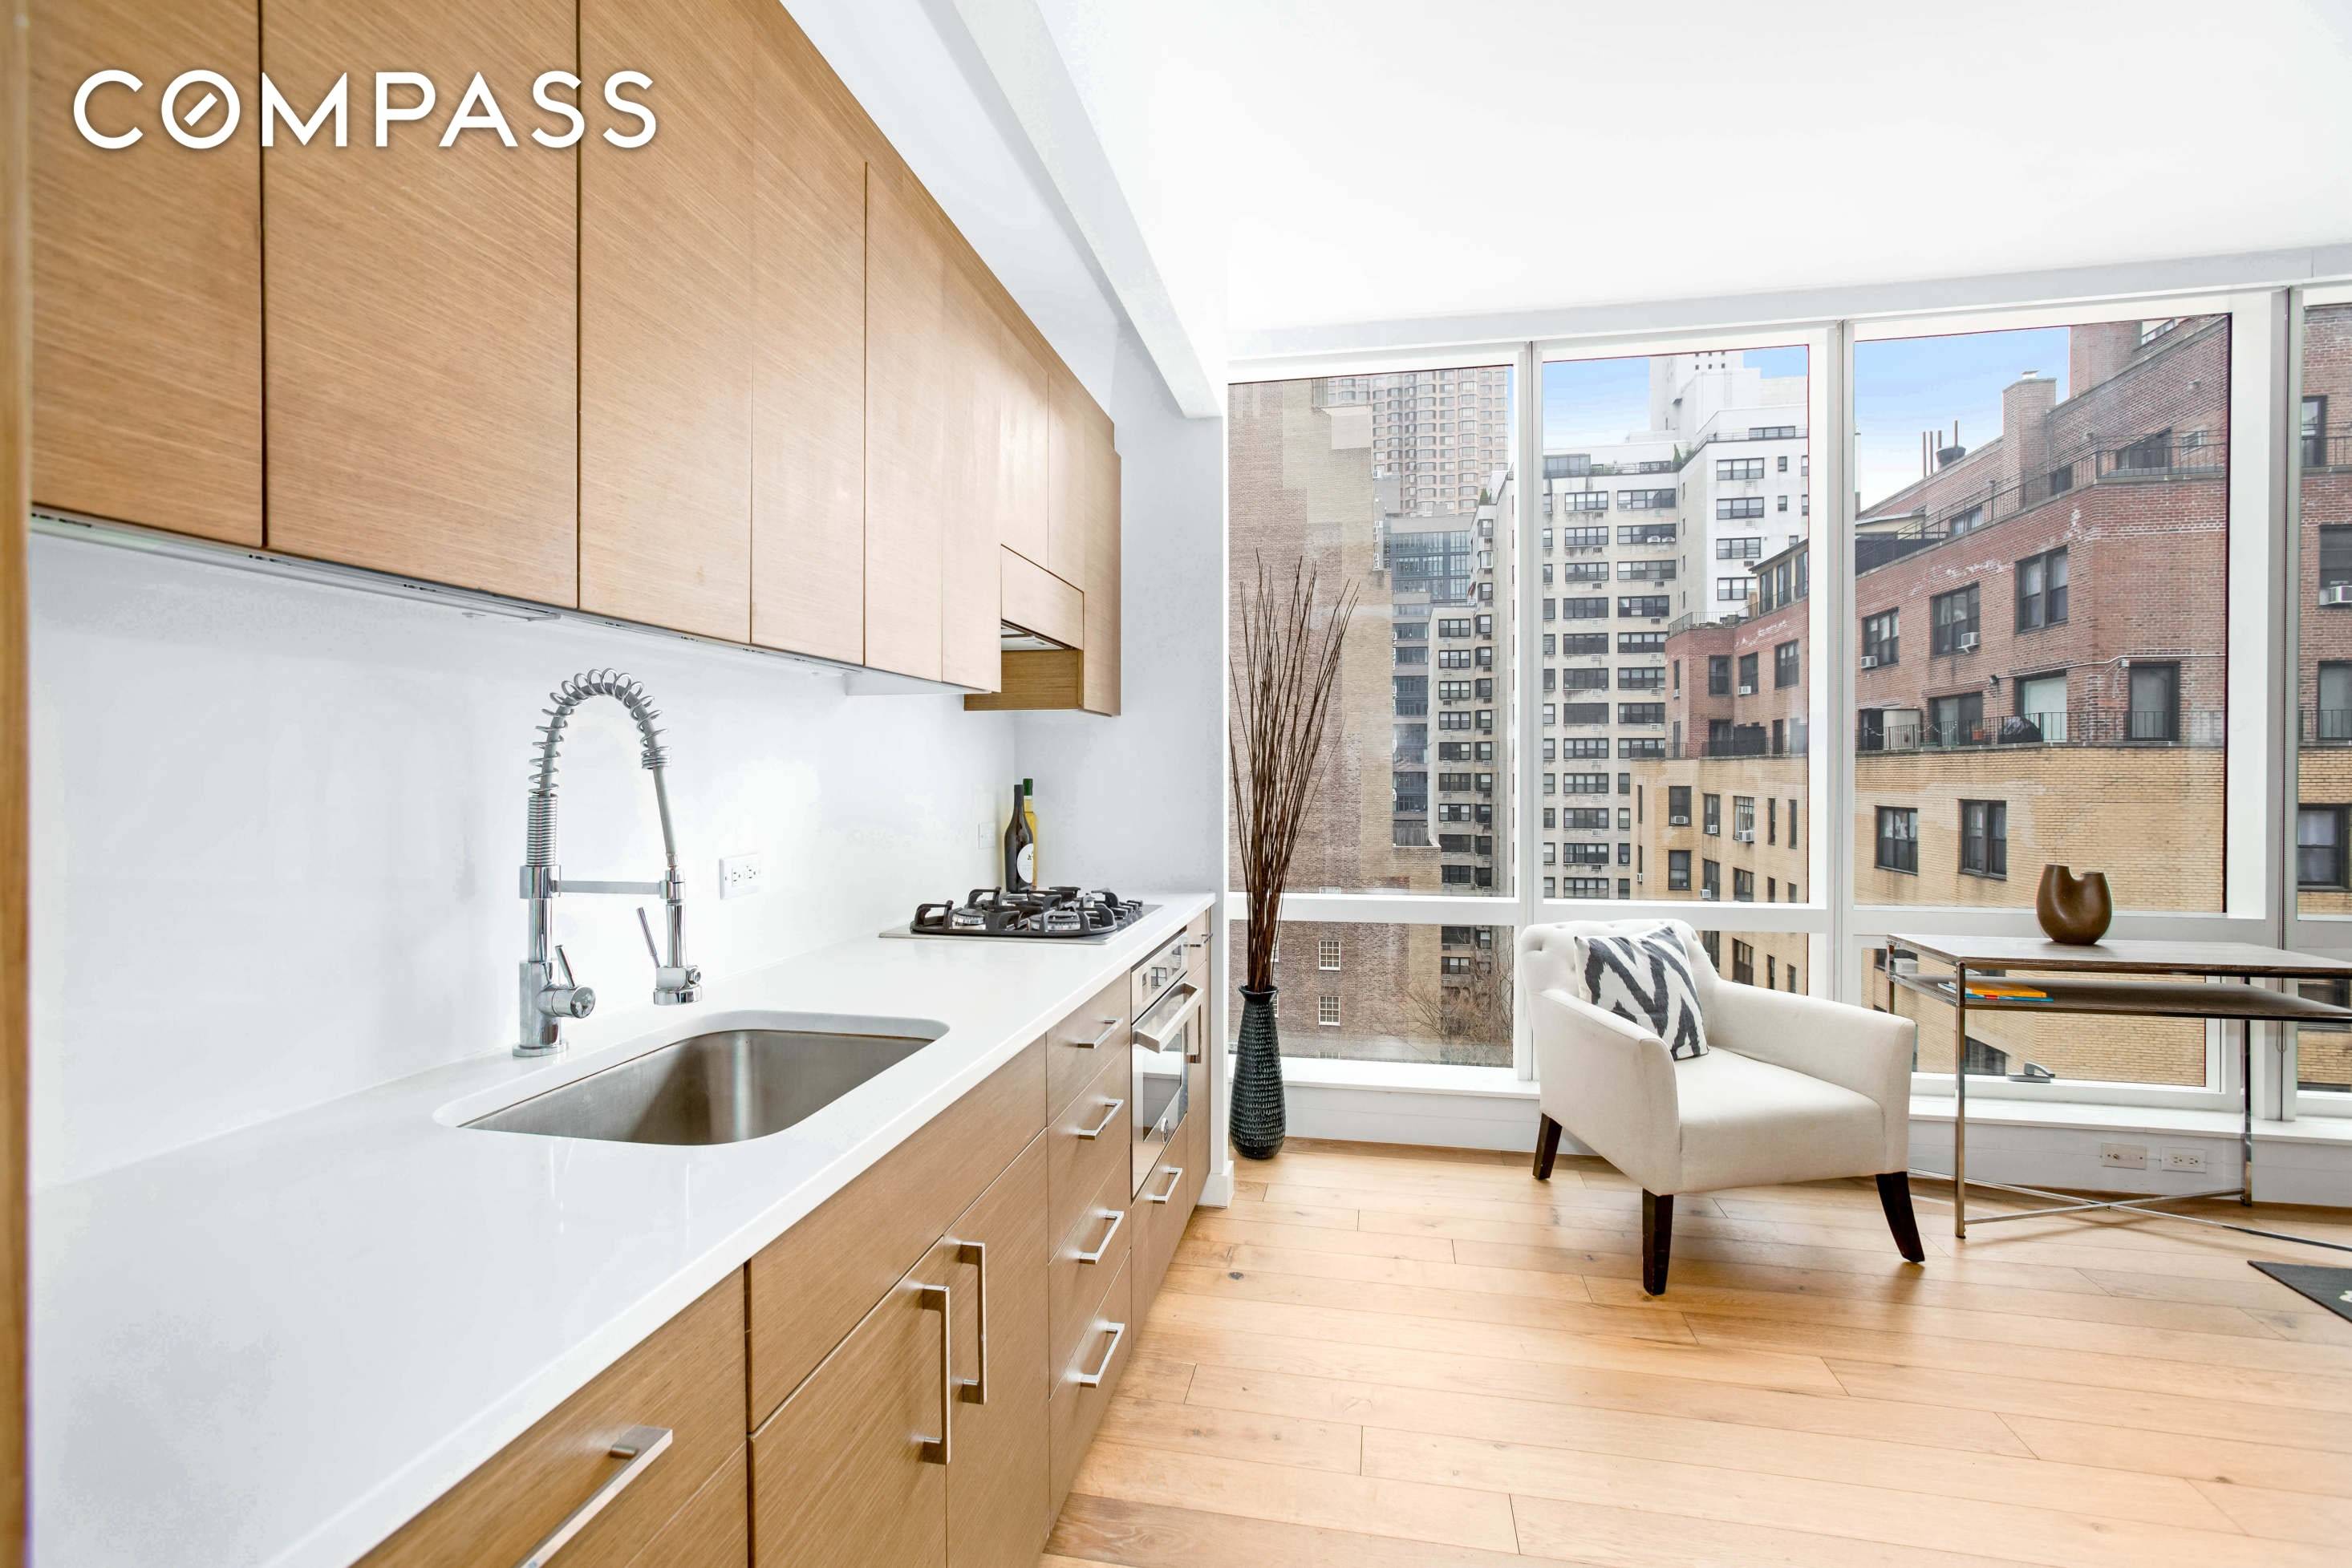 Premium finishes and breathtaking views make this a not to be missed studio haven in a full service Murray Hill condominium building.